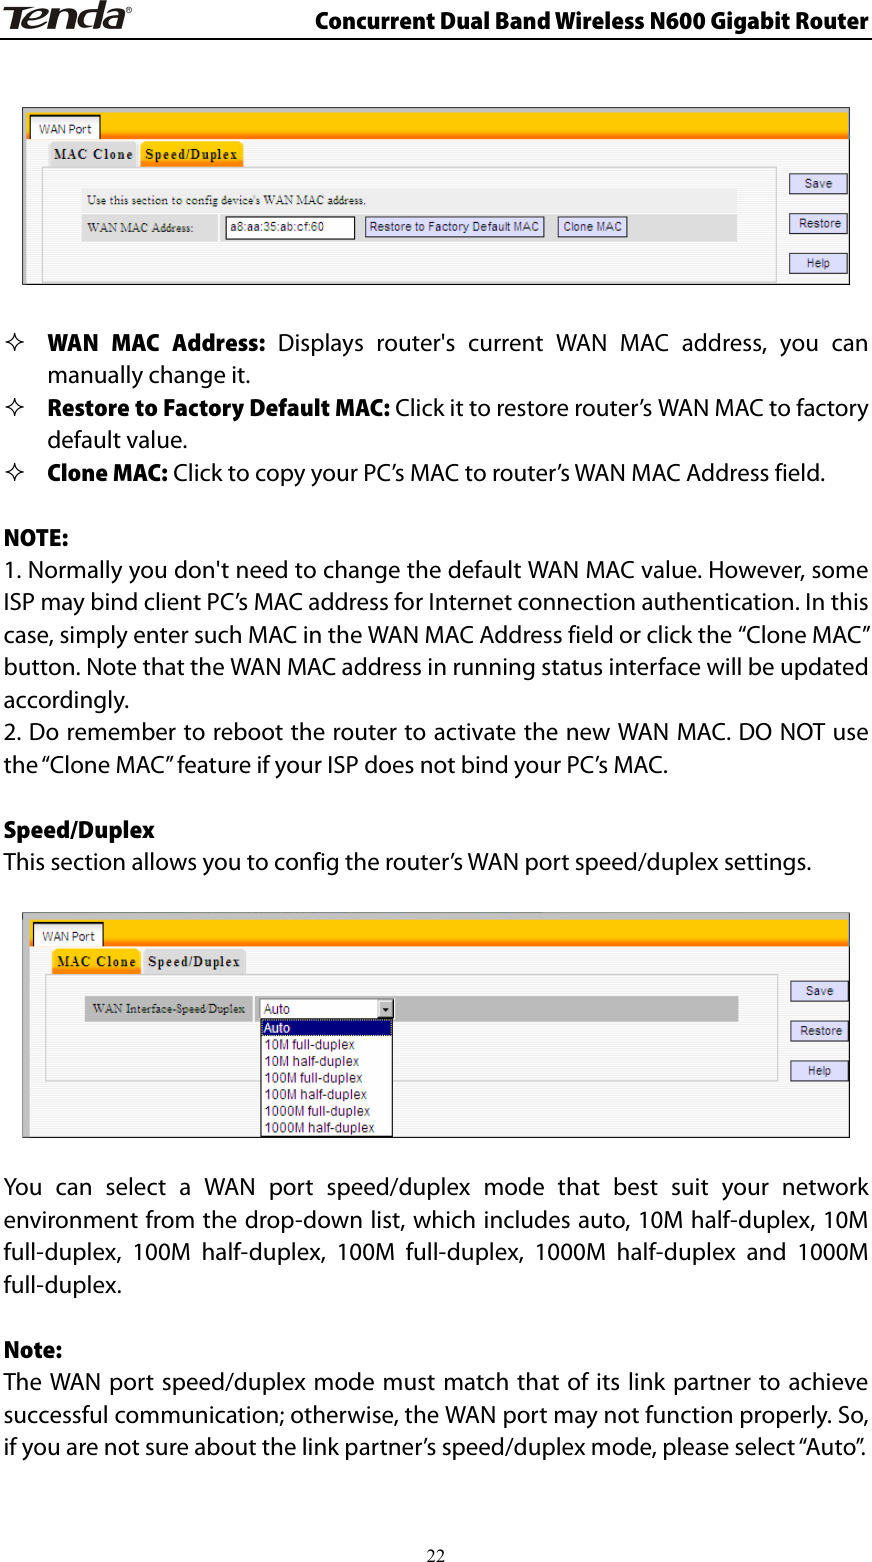                      Concurrent Dual Band Wireless N600 Gigabit Router     WAN MAC Address: Displays router&apos;s current WAN MAC address, you can manually change it.  Restore to Factory Default MAC: Click it to restore router’s WAN MAC to factory default value.  Clone MAC: Click to copy your PC’s MAC to router’s WAN MAC Address field.  NOTE: 1. Normally you don&apos;t need to change the default WAN MAC value. However, some ISP may bind client PC’s MAC address for Internet connection authentication. In this case, simply enter such MAC in the WAN MAC Address field or click the “Clone MAC” button. Note that the WAN MAC address in running status interface will be updated accordingly. 2. Do remember to reboot the router to activate the new WAN MAC. DO NOT use the “Clone MAC” feature if your ISP does not bind your PC’s MAC.    Speed/Duplex This section allows you to config the router’s WAN port speed/duplex settings.    You can select a WAN port speed/duplex mode that best suit your network environment from the drop-down list, which includes auto, 10M half-duplex, 10M full-duplex, 100M half-duplex, 100M full-duplex, 1000M half-duplex and 1000M full-duplex.  Note:  The WAN port speed/duplex mode must match that of its link partner to achieve successful communication; otherwise, the WAN port may not function properly. So, if you are not sure about the link partner’s speed/duplex mode, please select “Auto”.   22